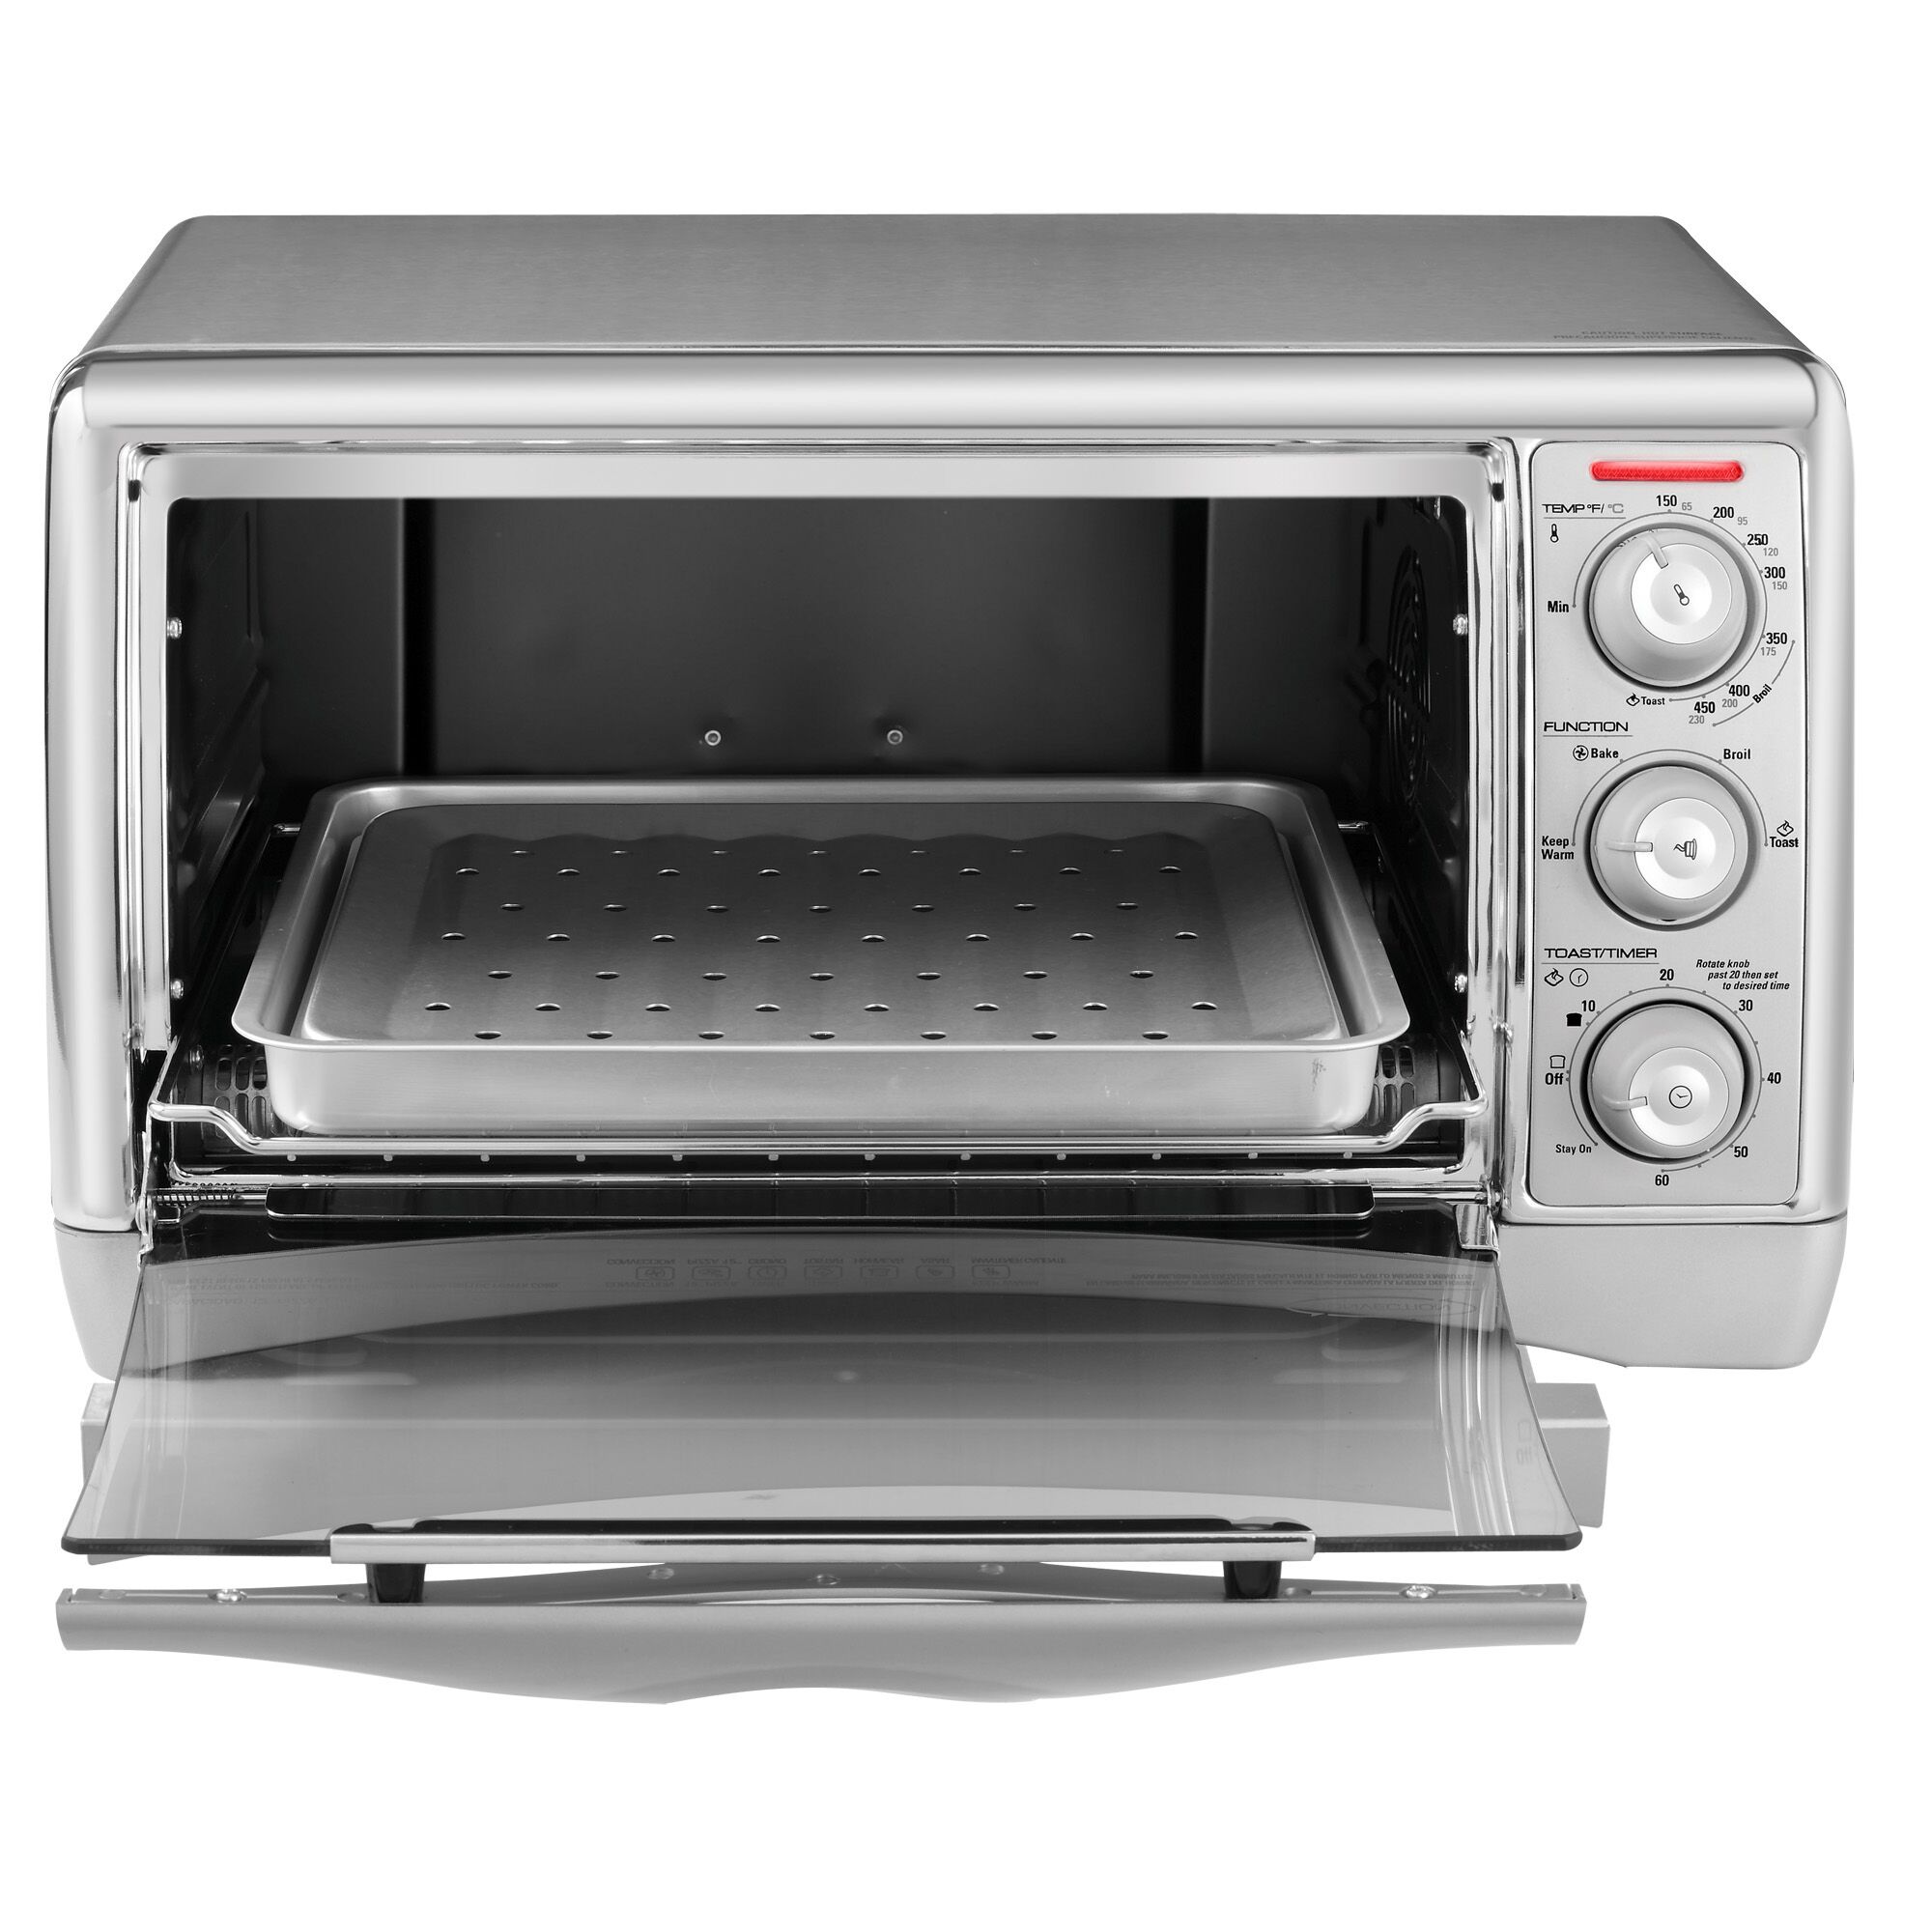 Profile of 6 Slice Countertop Convection Toaster Oven.